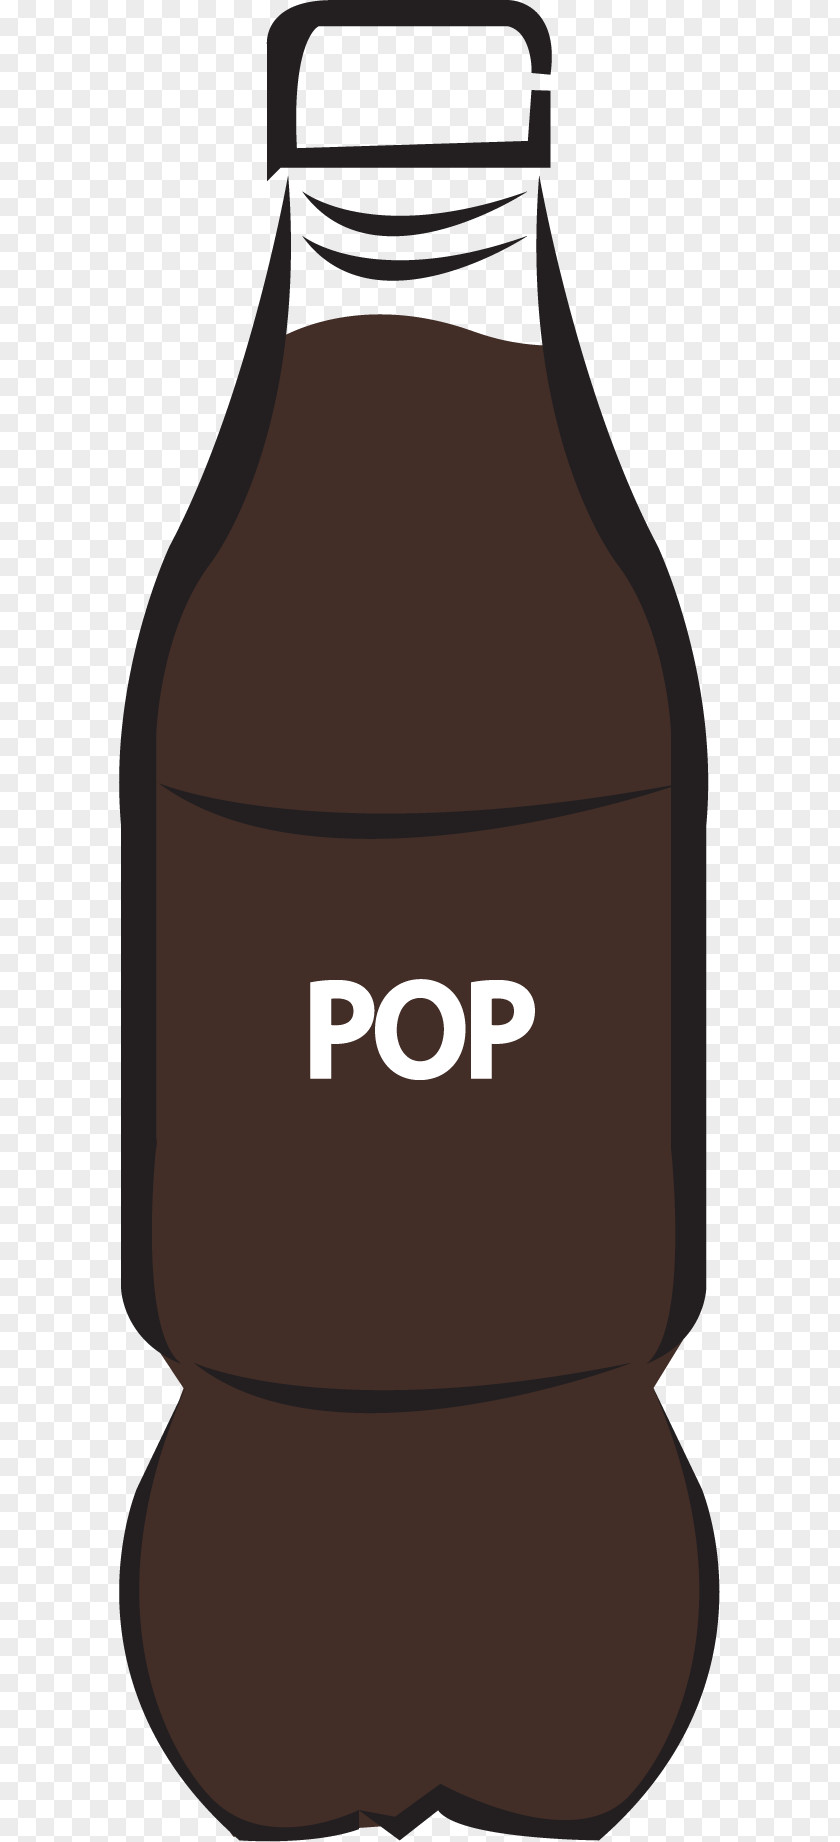 Sugary Beverages Fizzy Drinks Bottle Sports & Energy Milk PNG